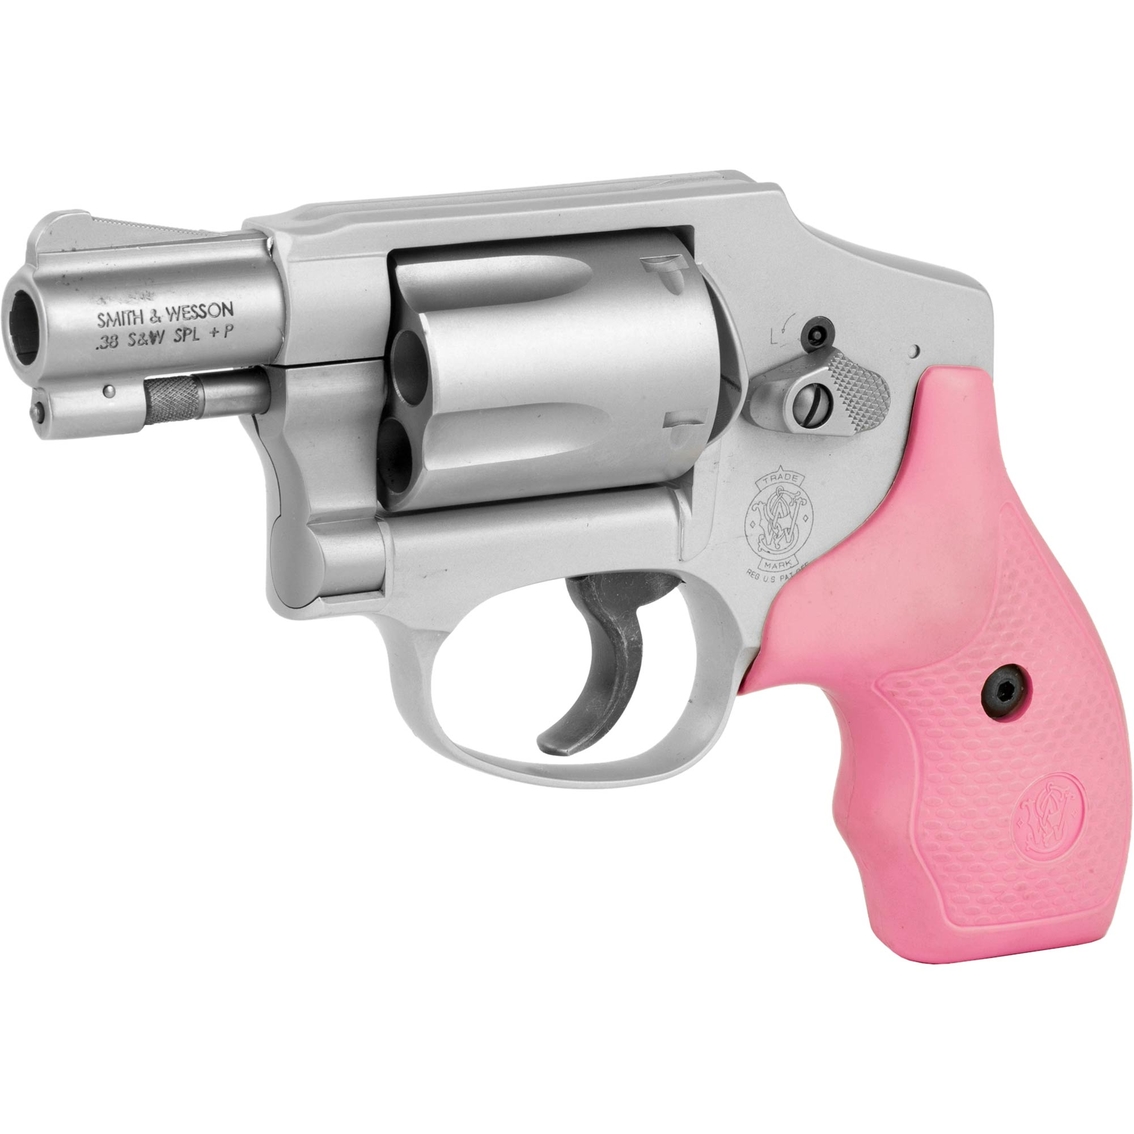 S&W 642 38 Special 1.875 in. Barrel 5 Rds Pink and Blk Grips Revolver SS - Image 3 of 3